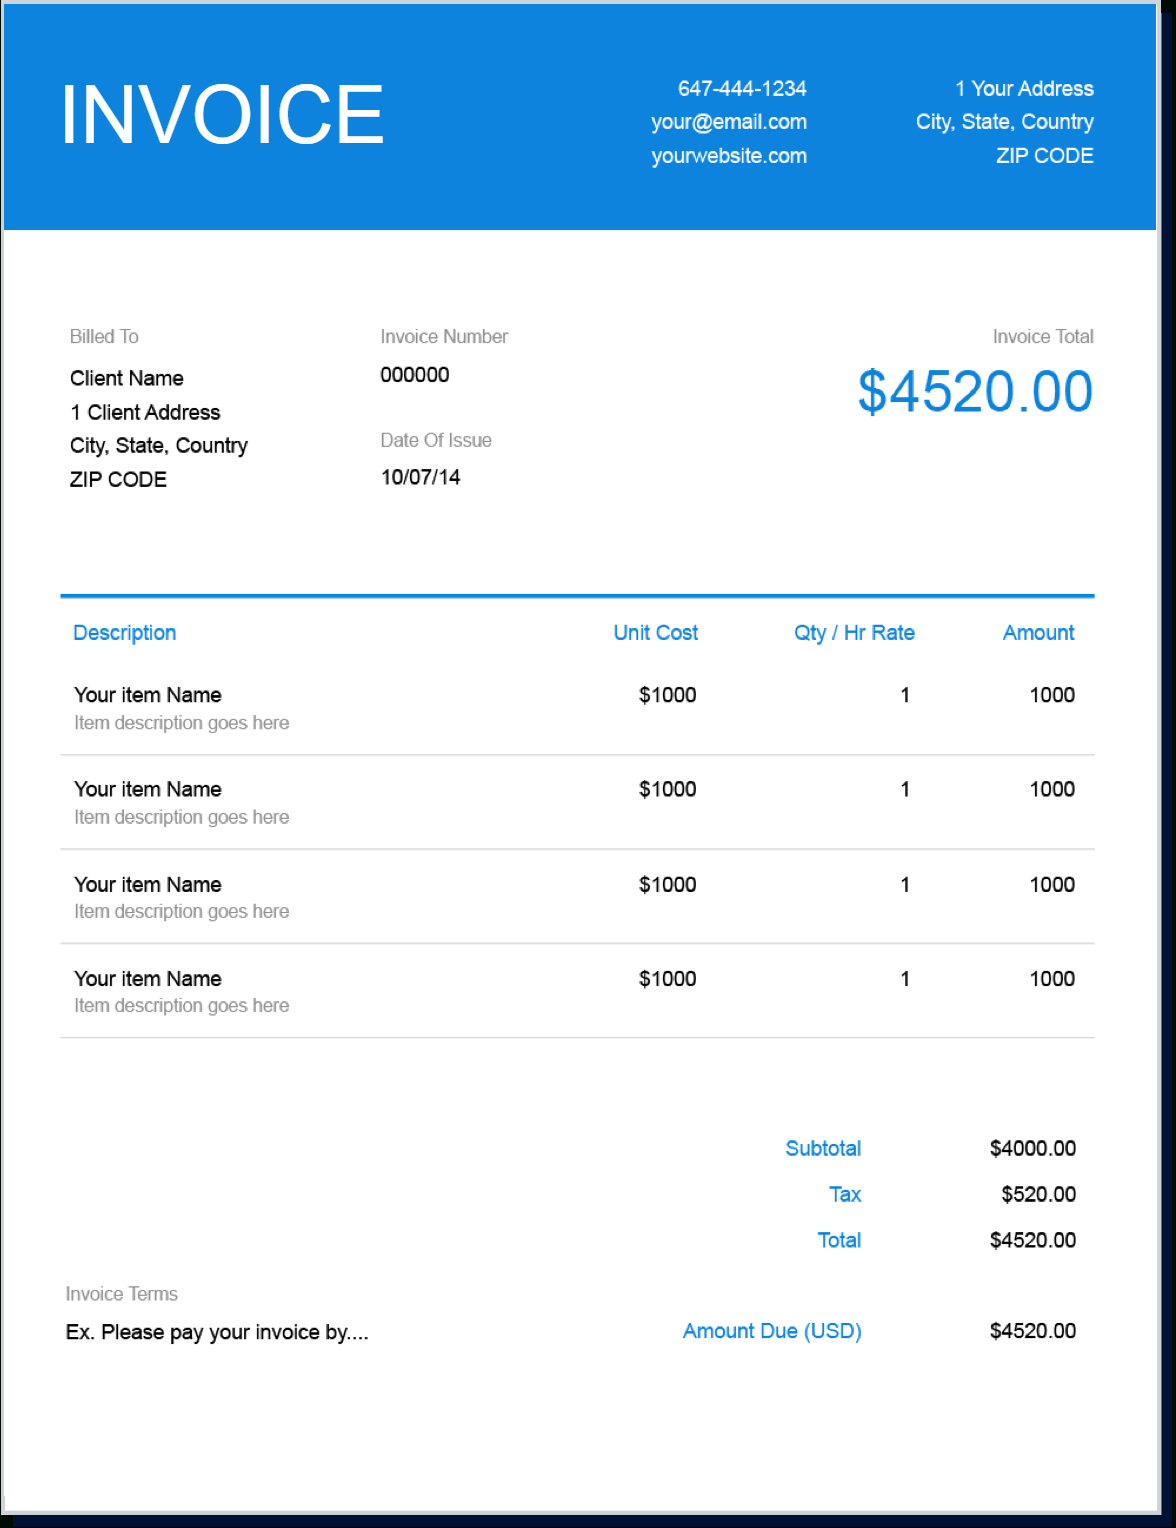 Invoice Template | Send In Minutes | Create Free Invoices Instantly - Free Printable Blank Invoice Sheet